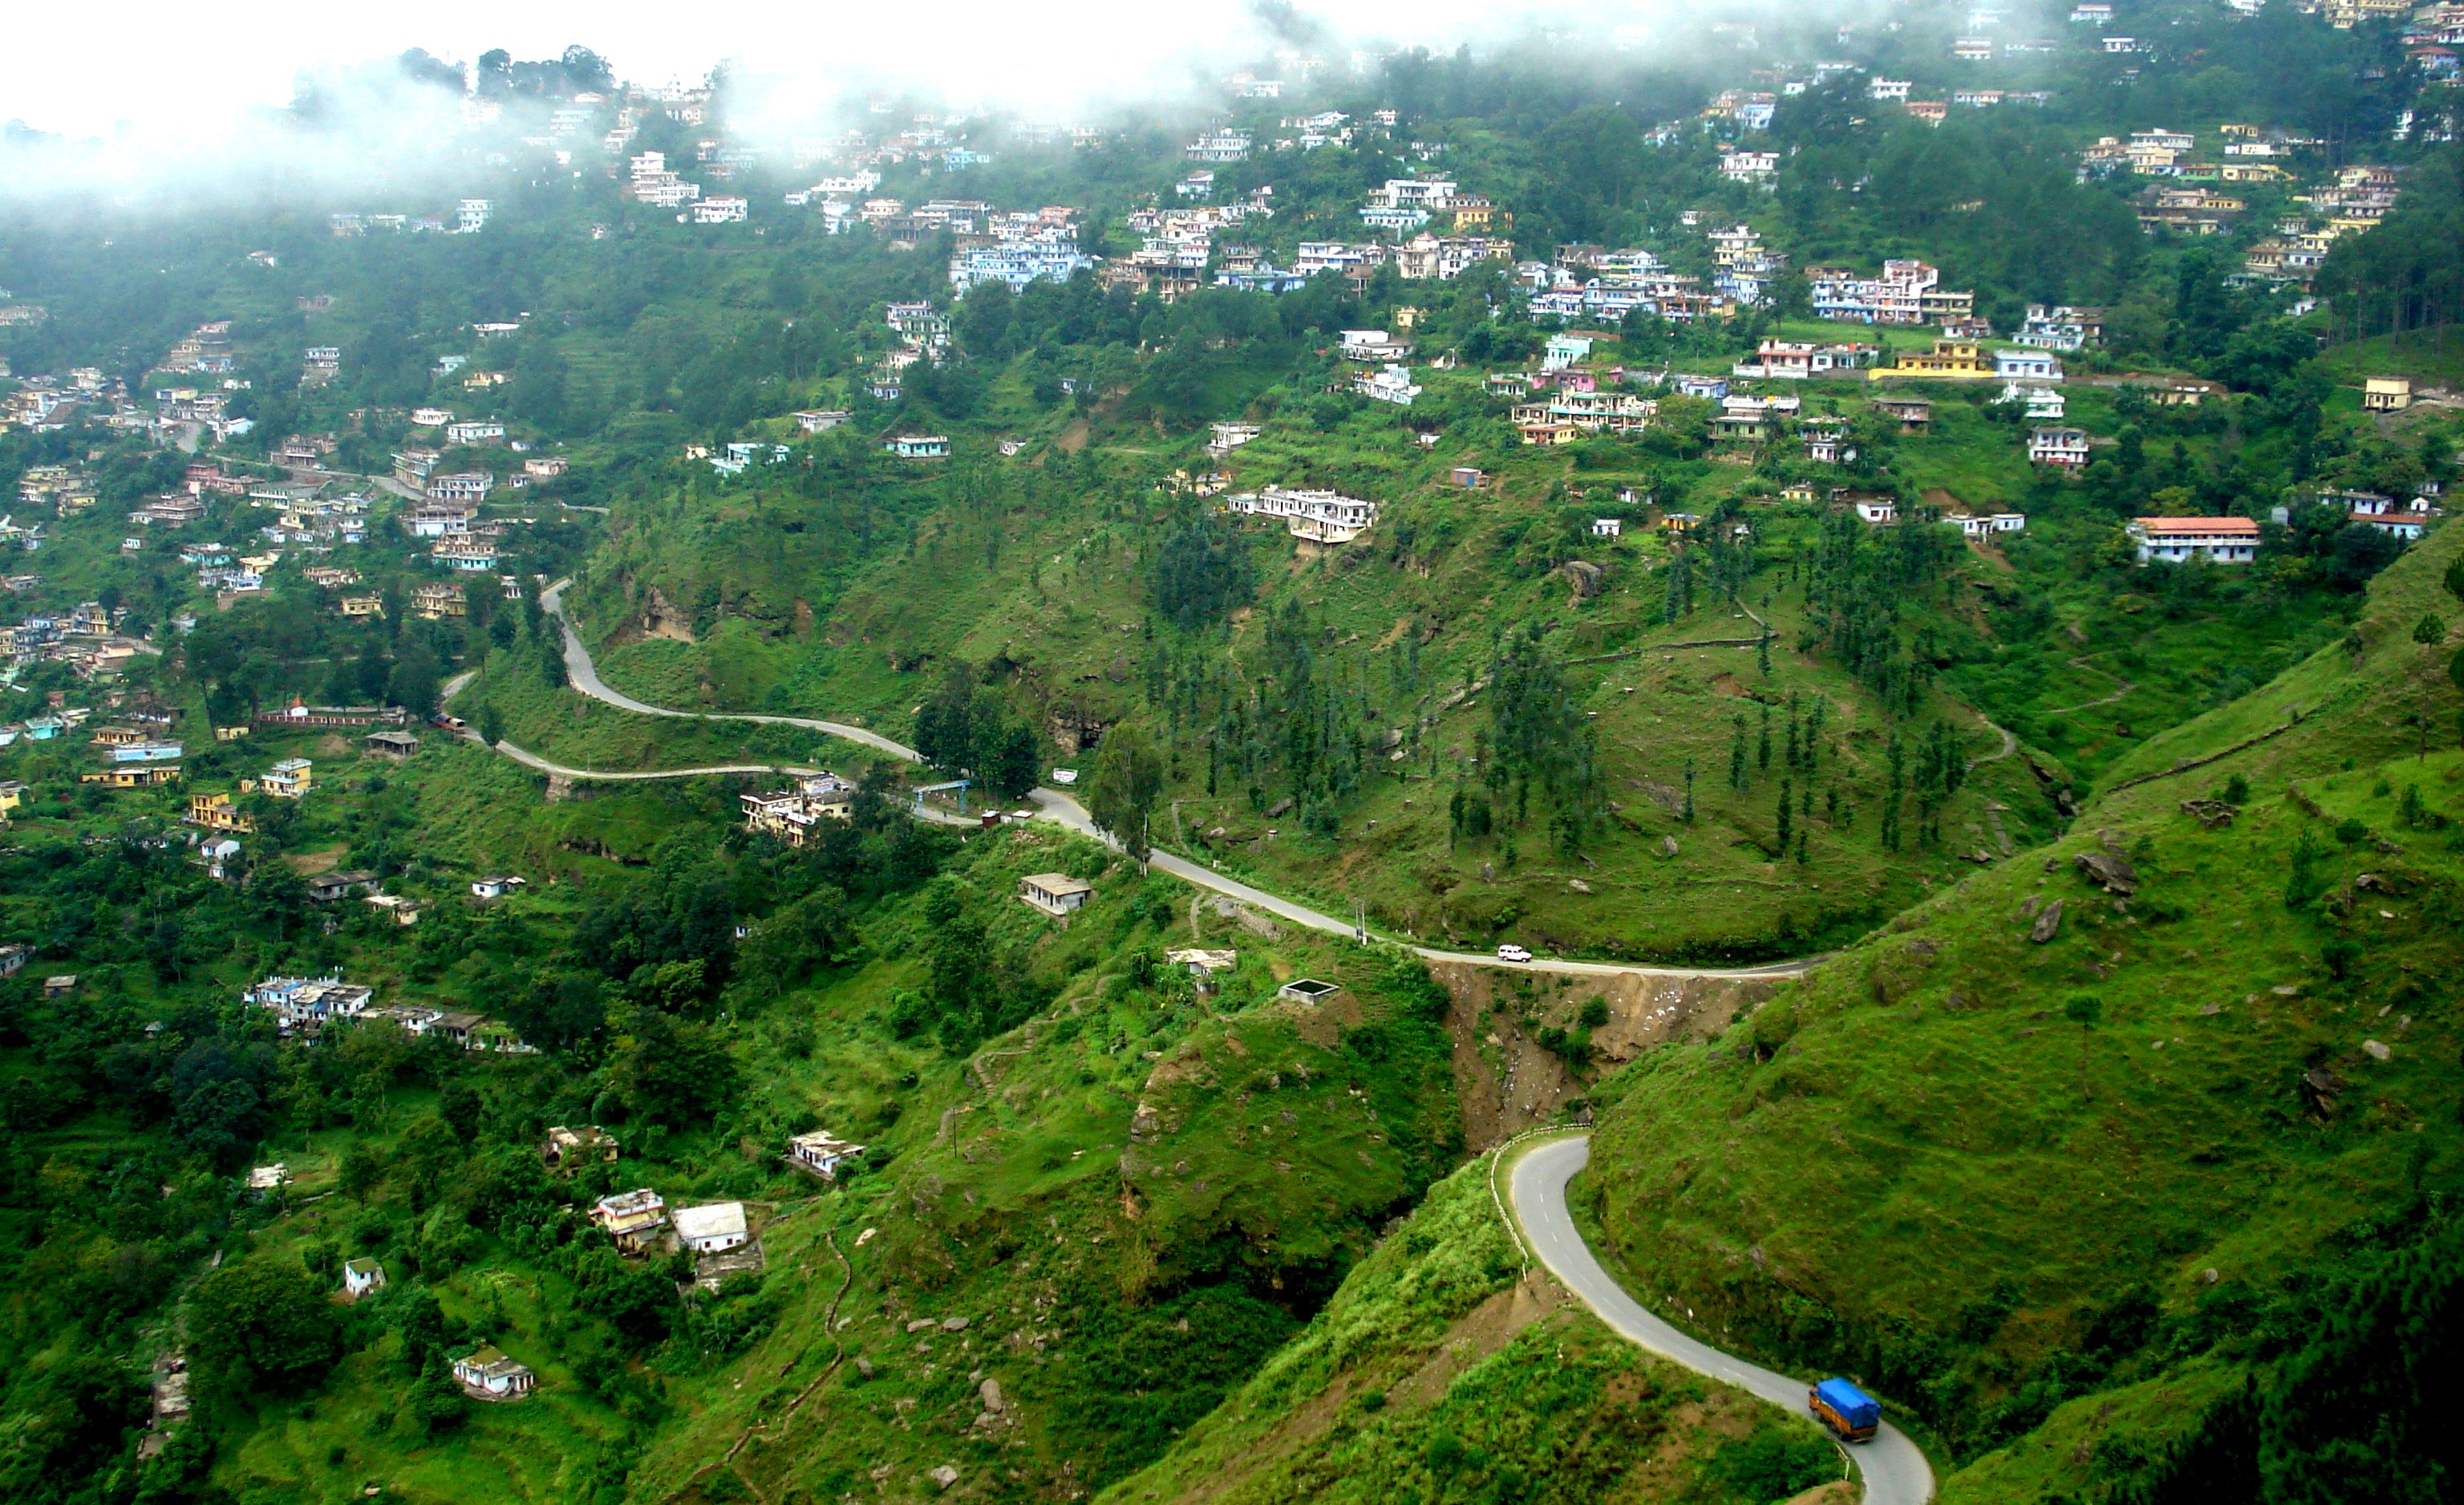 ALMORA Photos, Image and Wallpapers, HD Image, Near by Image